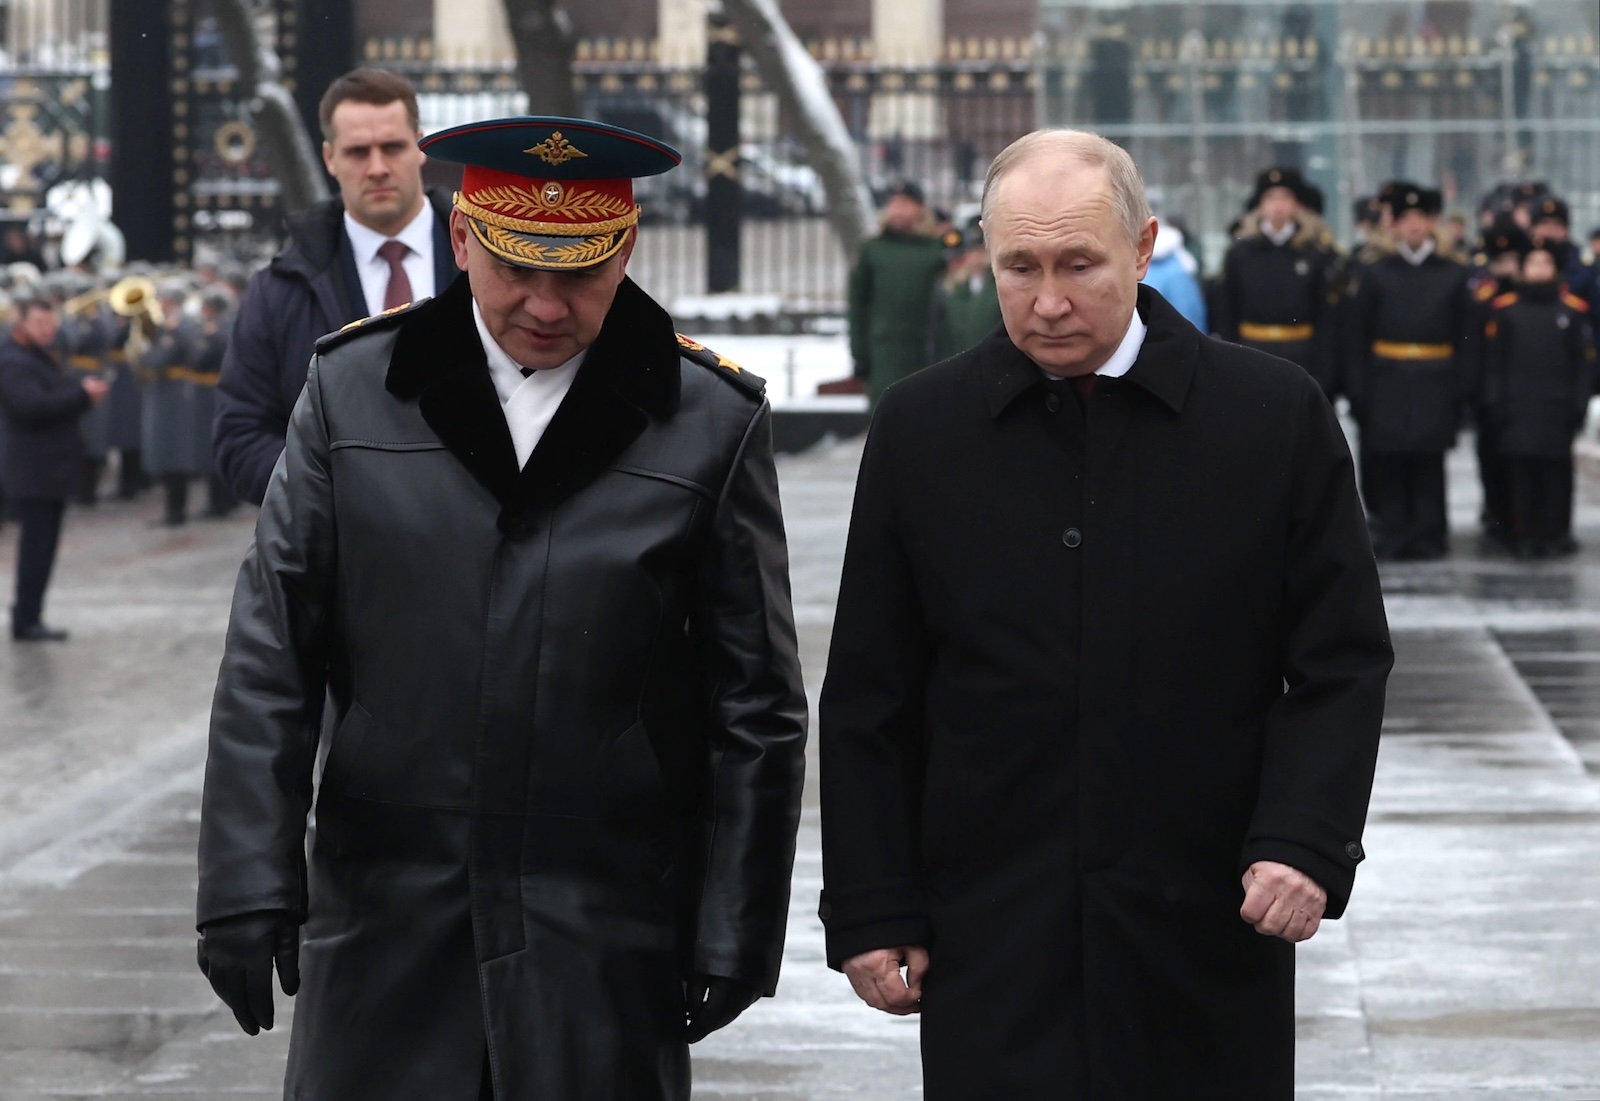 epa11175231 Russian President Vladimir Putin (R) and Defence Minister Sergei Shoigu (L) take part in a wreath laying ceremony at the Tomb of the Unknown Soldier in Alexander Garden on Defender of the Fatherland Day, in Moscow, Russia 23 February 2024. The 23 February is celebrated as the Defender of the Fatherland Day in Russia, Belarus, Kyrgyzstan, and Tajikistan marking the date in 1918 when the first mass draft into the Red Army took place in Moscow and Petrograd during the country's Civil War and war against the German Emperor.  EPA/ALEXANDER KAZAKOV/SPUTNIK/KREMLIN POOL MANDATORY CREDIT